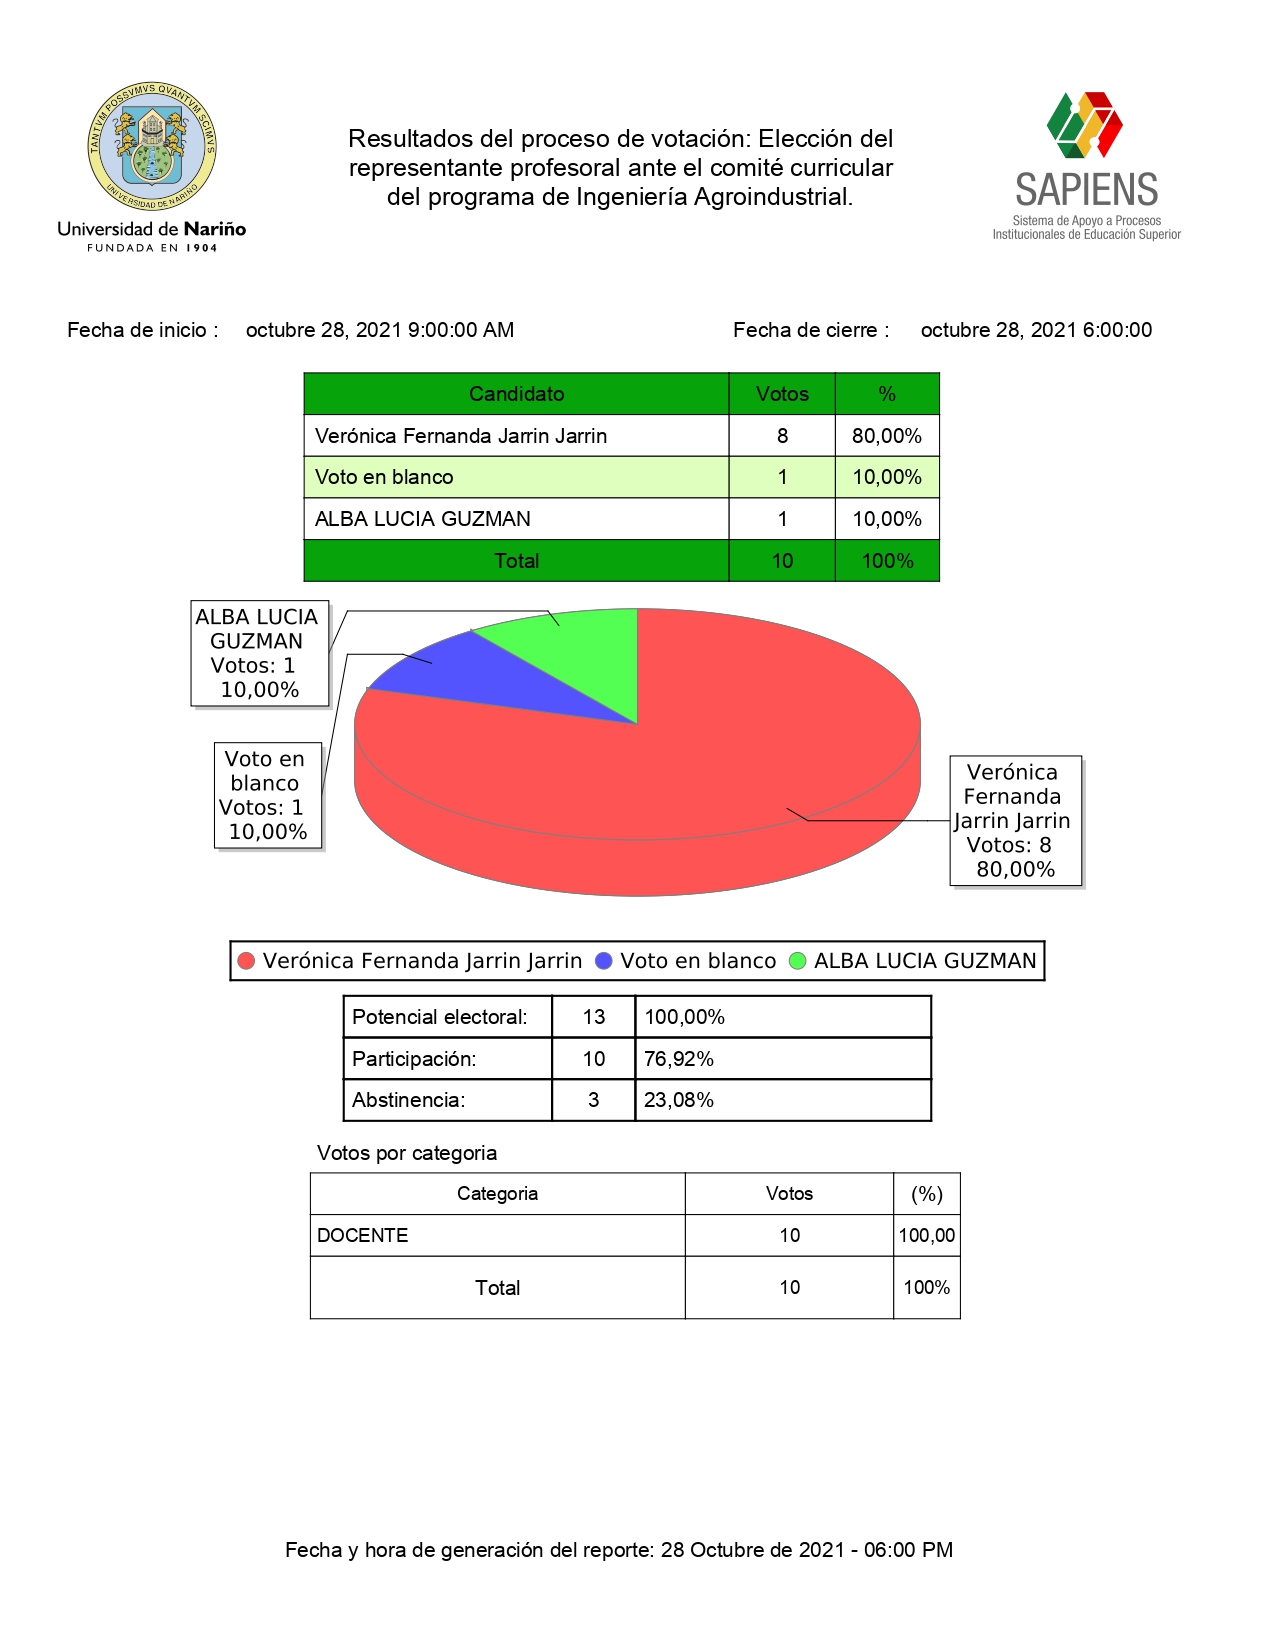 ResultadosRepProfCCIngAgro_pages-to-jpg-0001